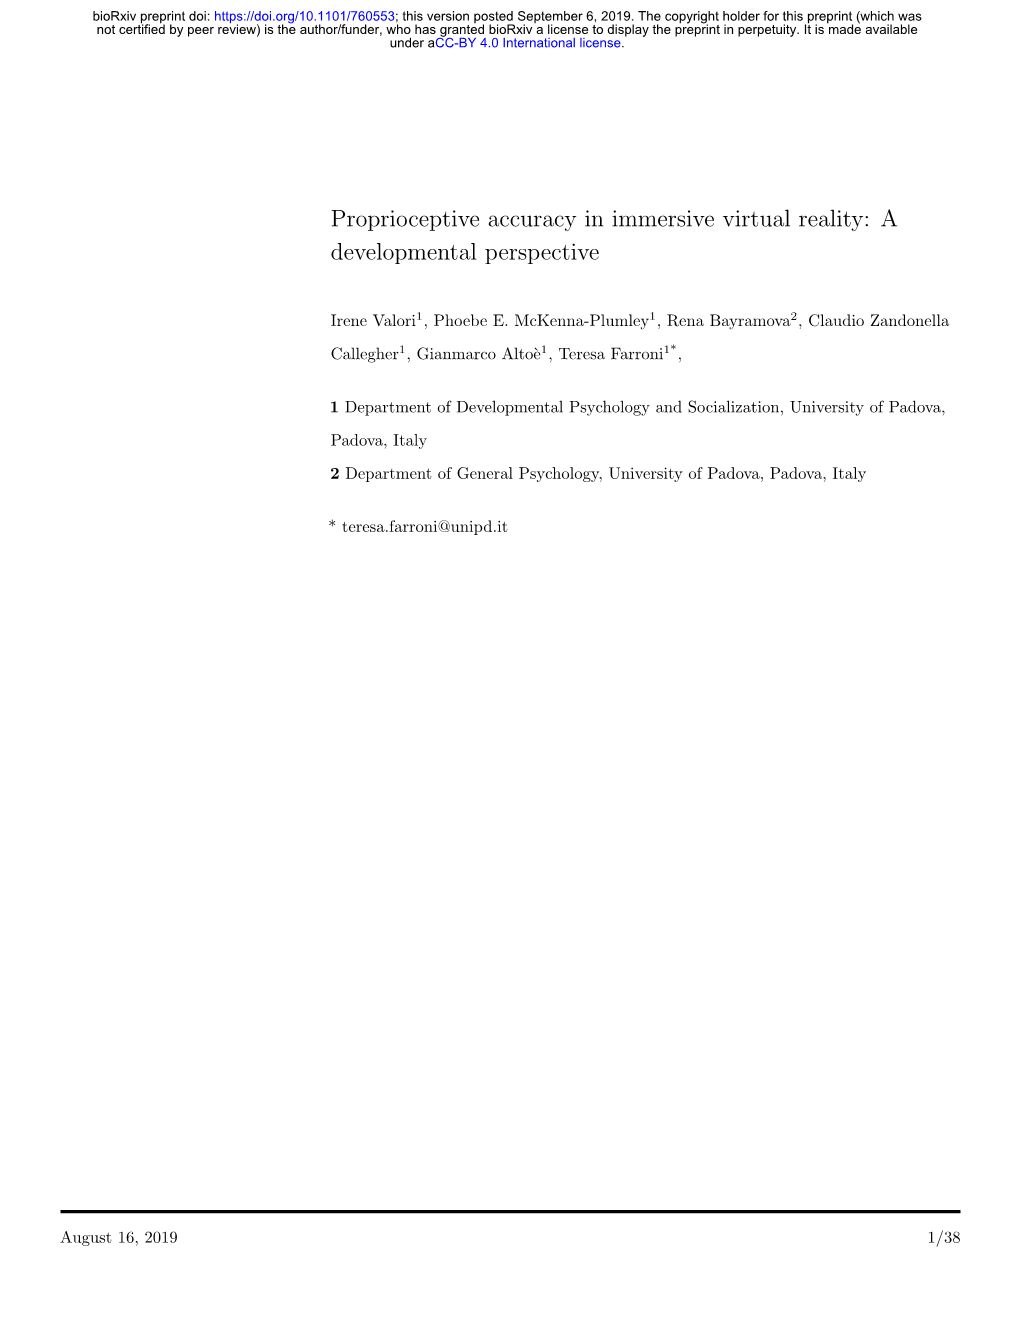 Proprioceptive Accuracy in Immersive Virtual Reality: a Developmental Perspective